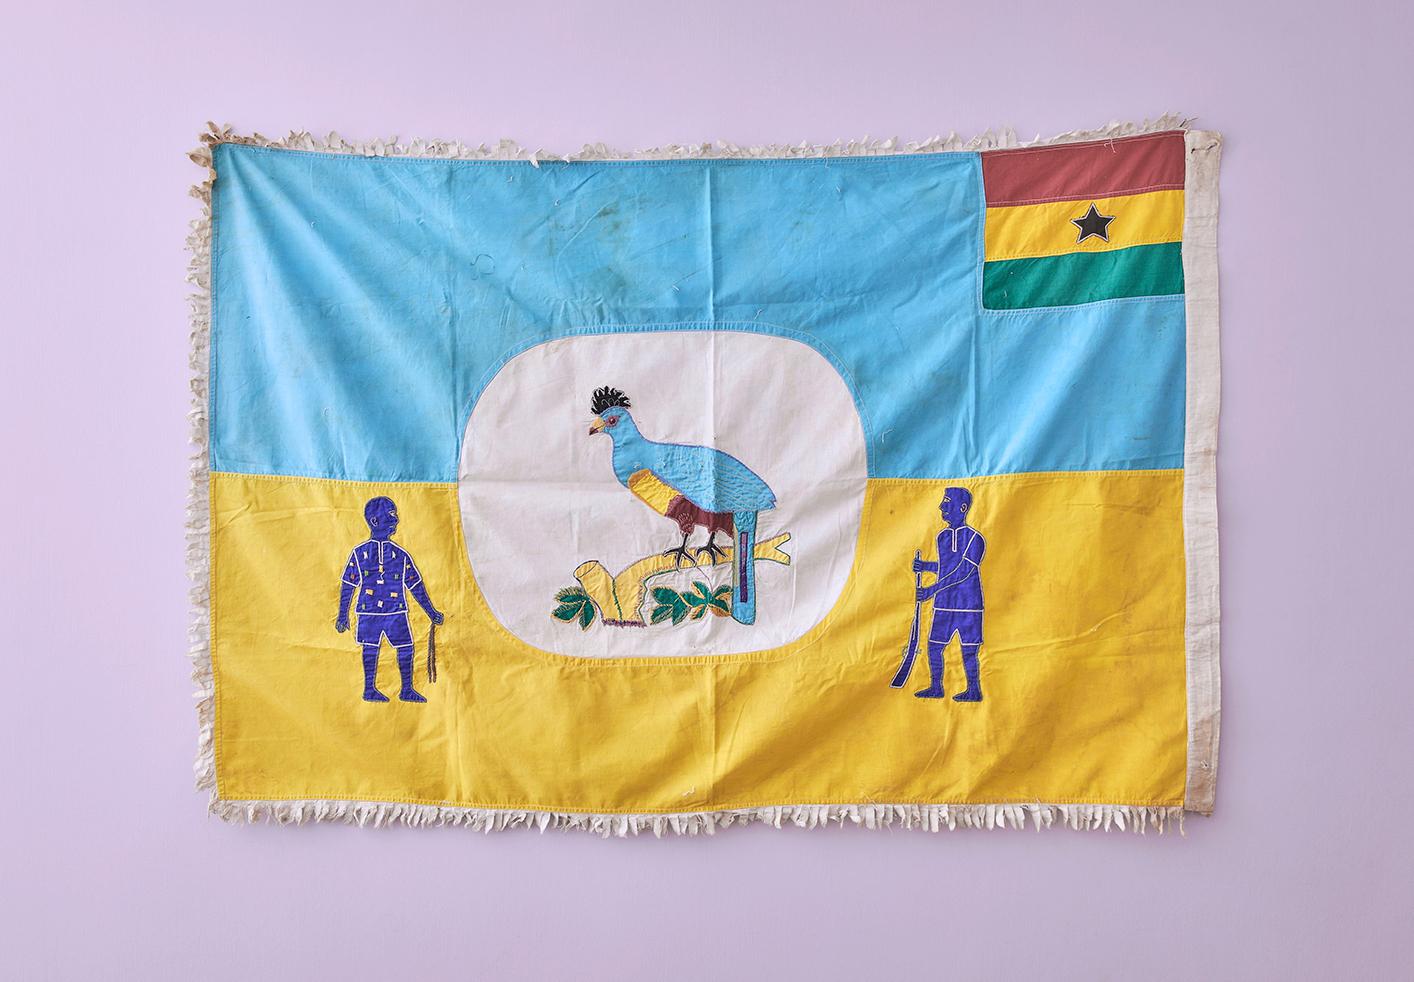 Kvamina Amoaku
Ghana, 1970's

Asafo flag in cotton applique patterns. Fante People.

Asafo Flags are created by the Fante people of Ghana. The flags are visual representations of military organisations in Fante communities known as “Asafo”. The